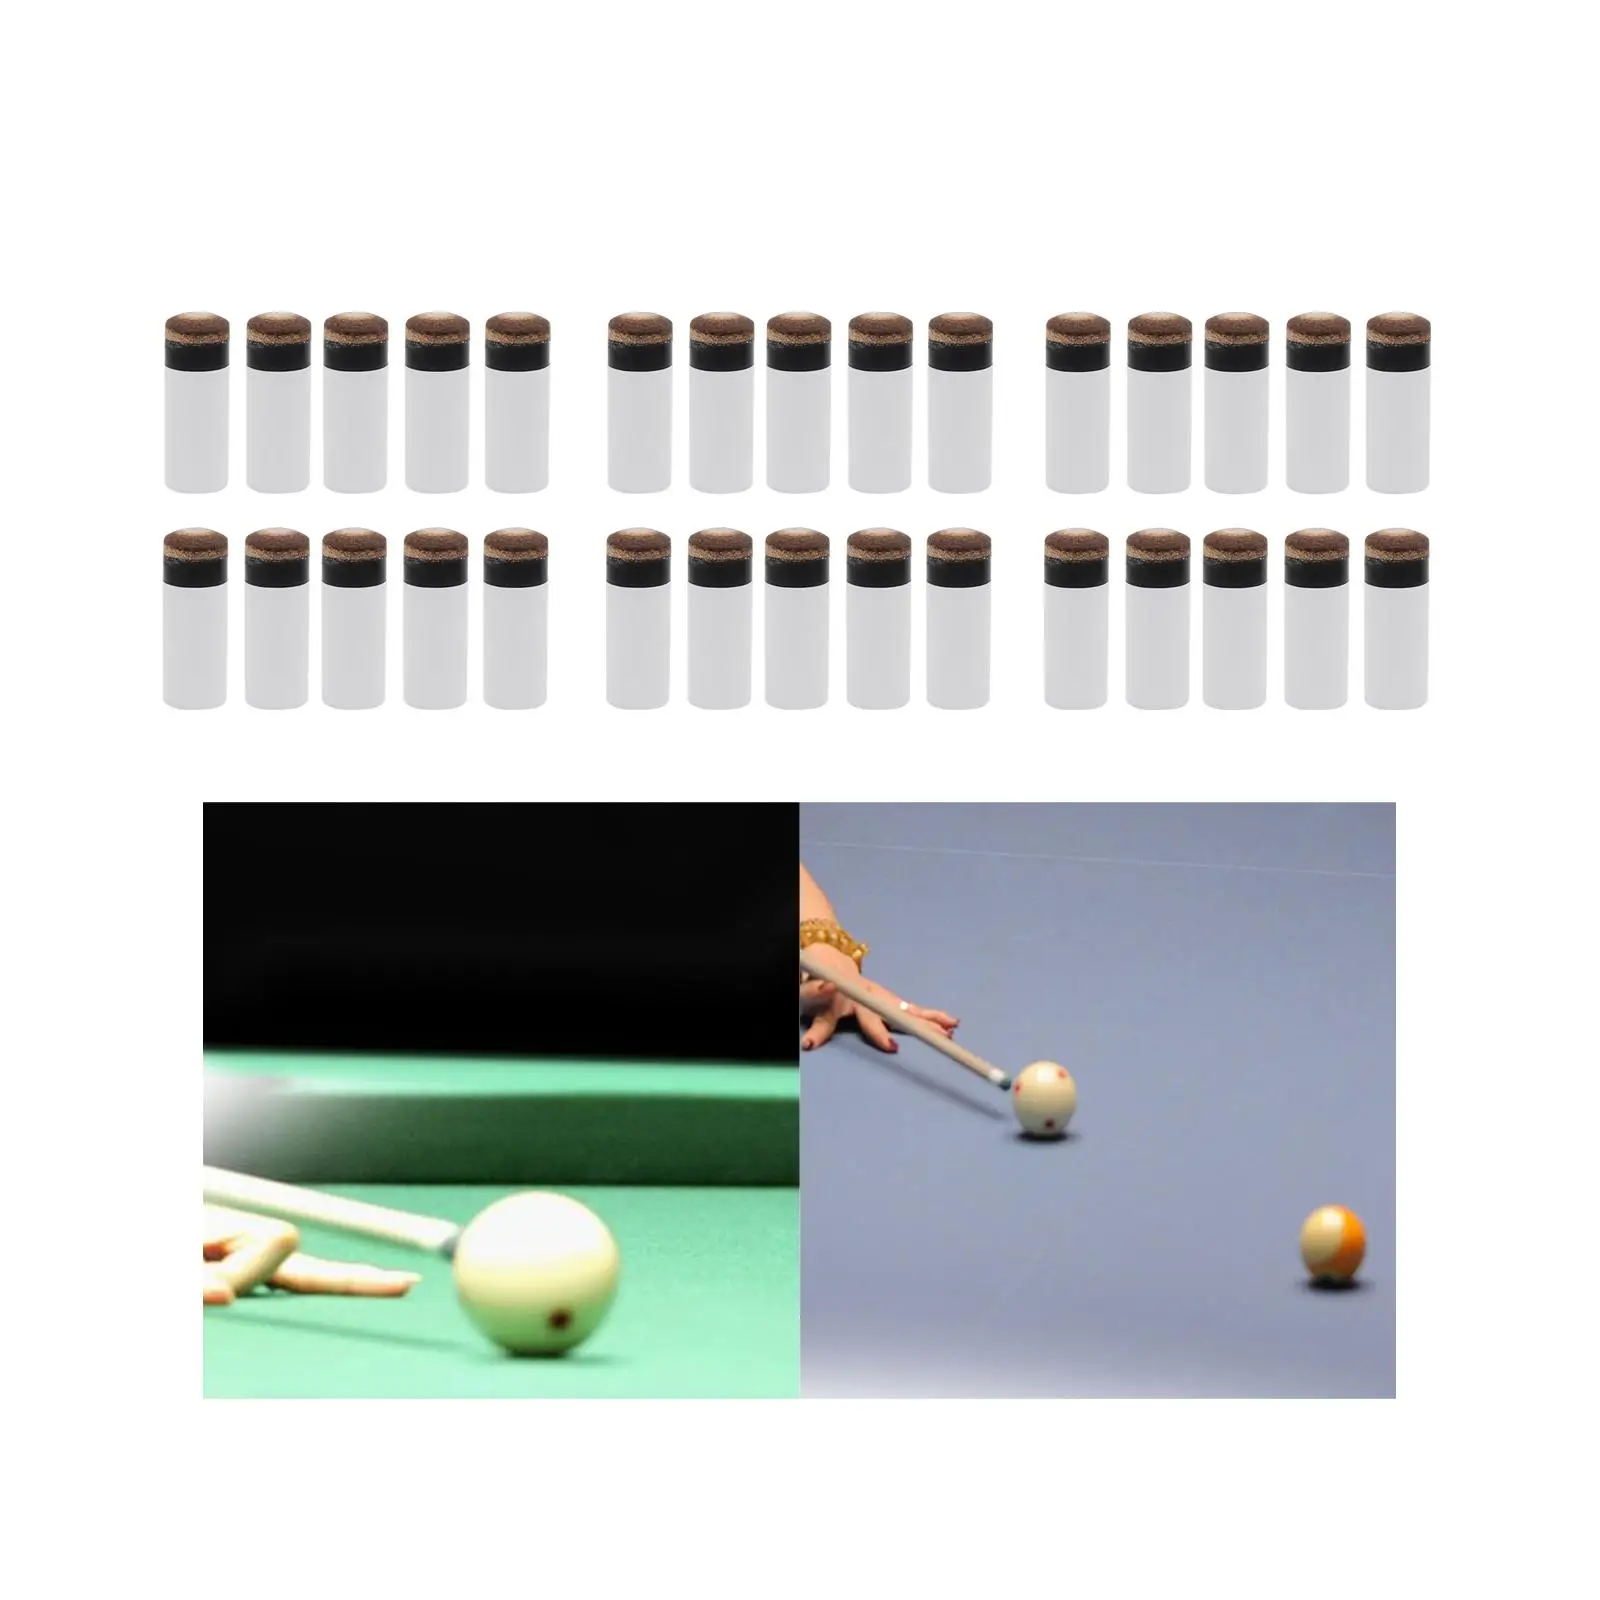 10 Pieces Pool Cue Tips Screw on Type Professional Snooker with Pool Cue Ferrules Billiard Screw Durable Pool Billiard Cues Tips